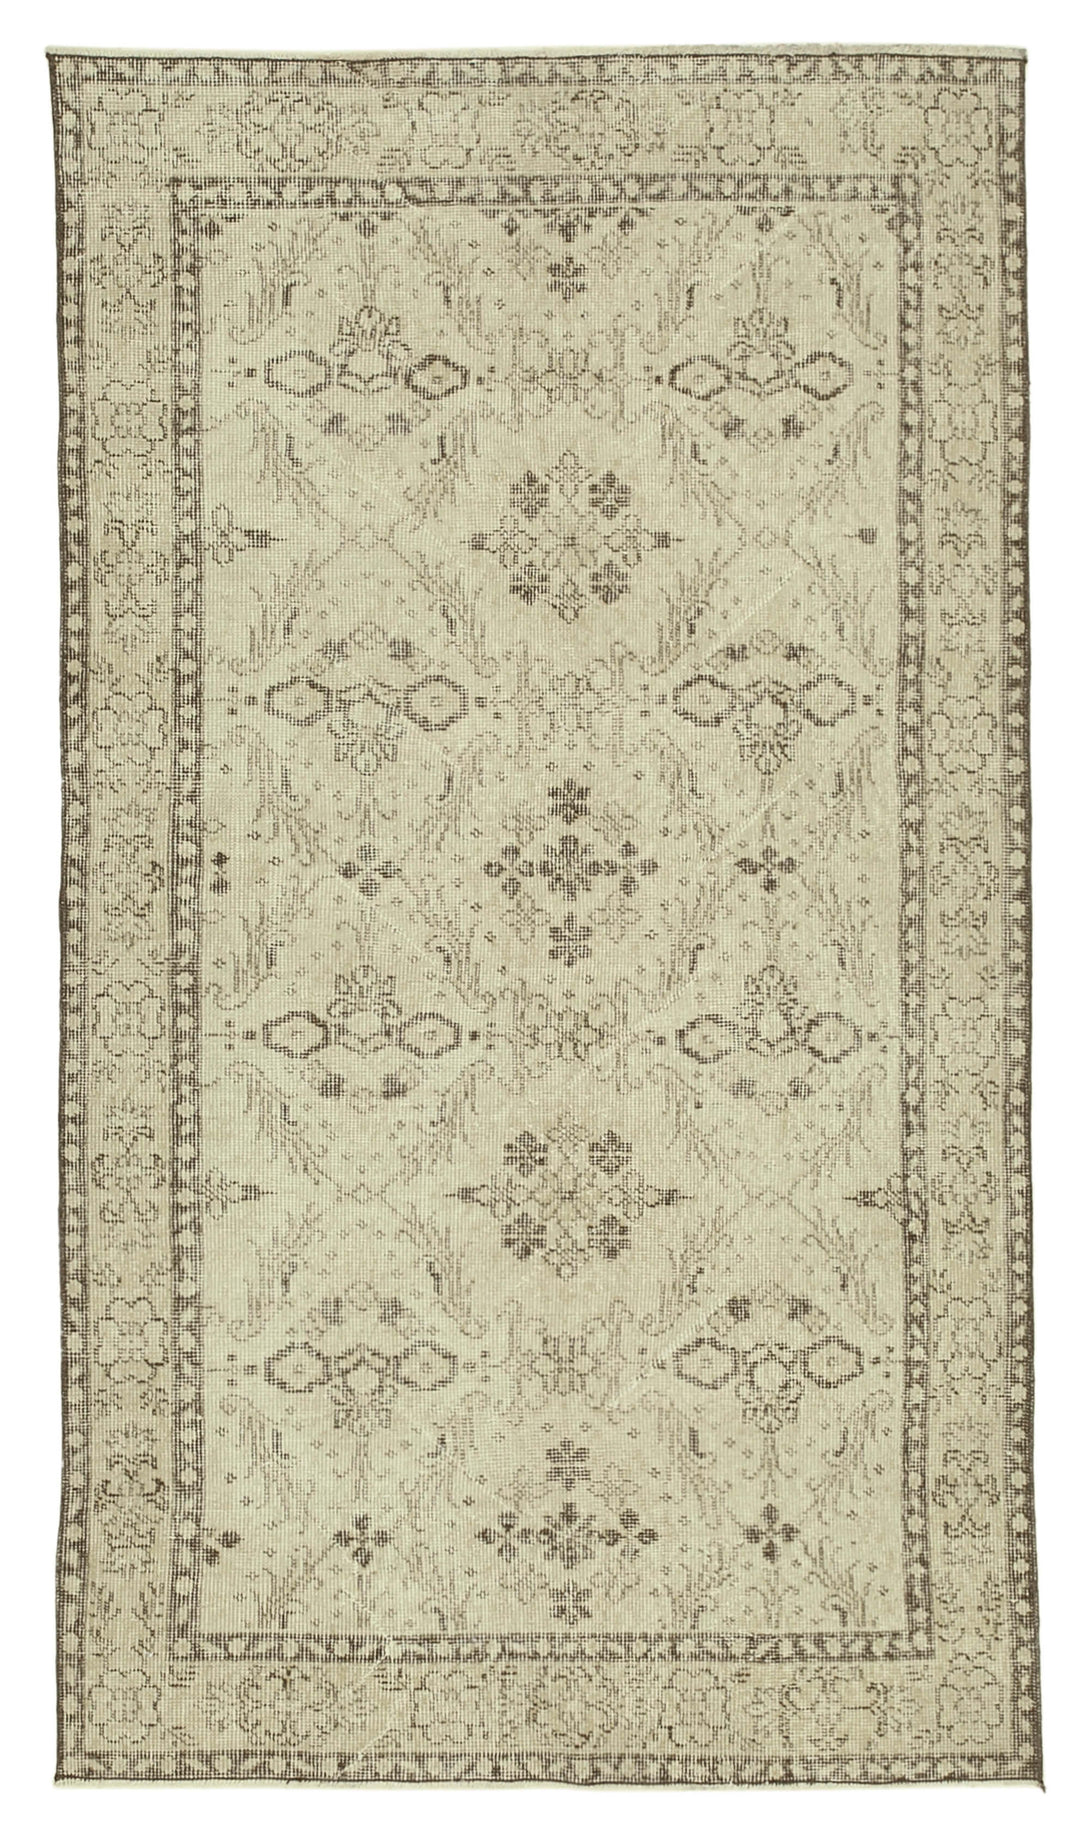 Handmade Overdyed Area Rug > Design# OL-AC-31285 > Size: 3'-8" x 6'-7", Carpet Culture Rugs, Handmade Rugs, NYC Rugs, New Rugs, Shop Rugs, Rug Store, Outlet Rugs, SoHo Rugs, Rugs in USA